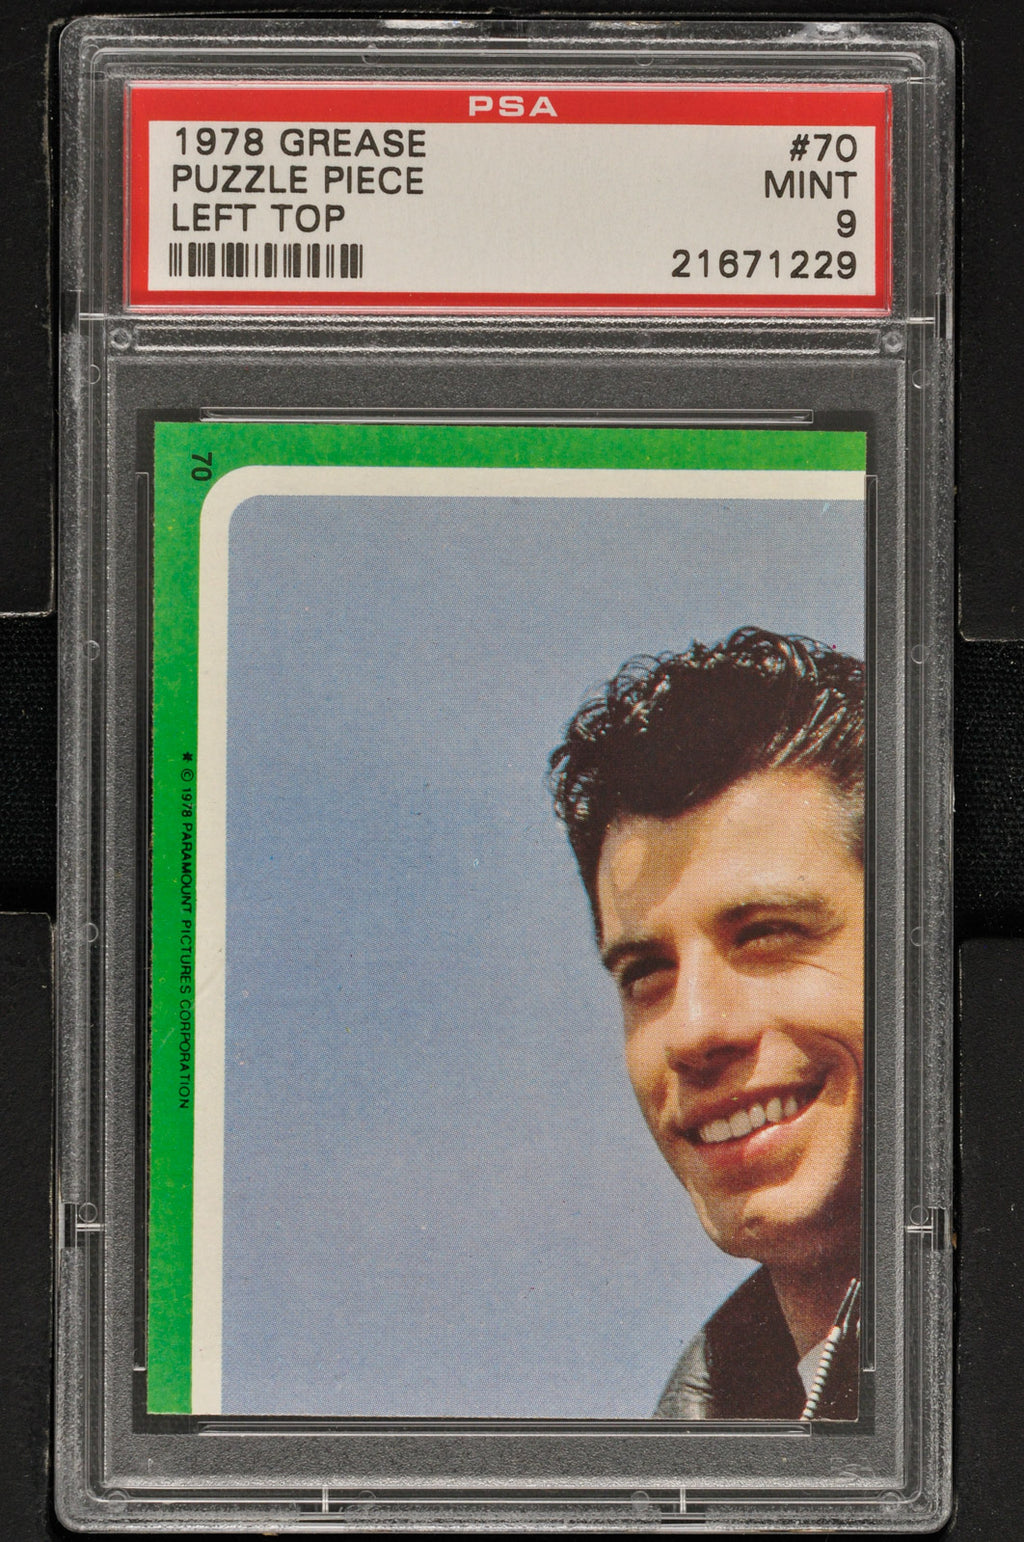 1978 - Topps Grease Series 2 #70 Puzzle Piece Left Top - PSA 9